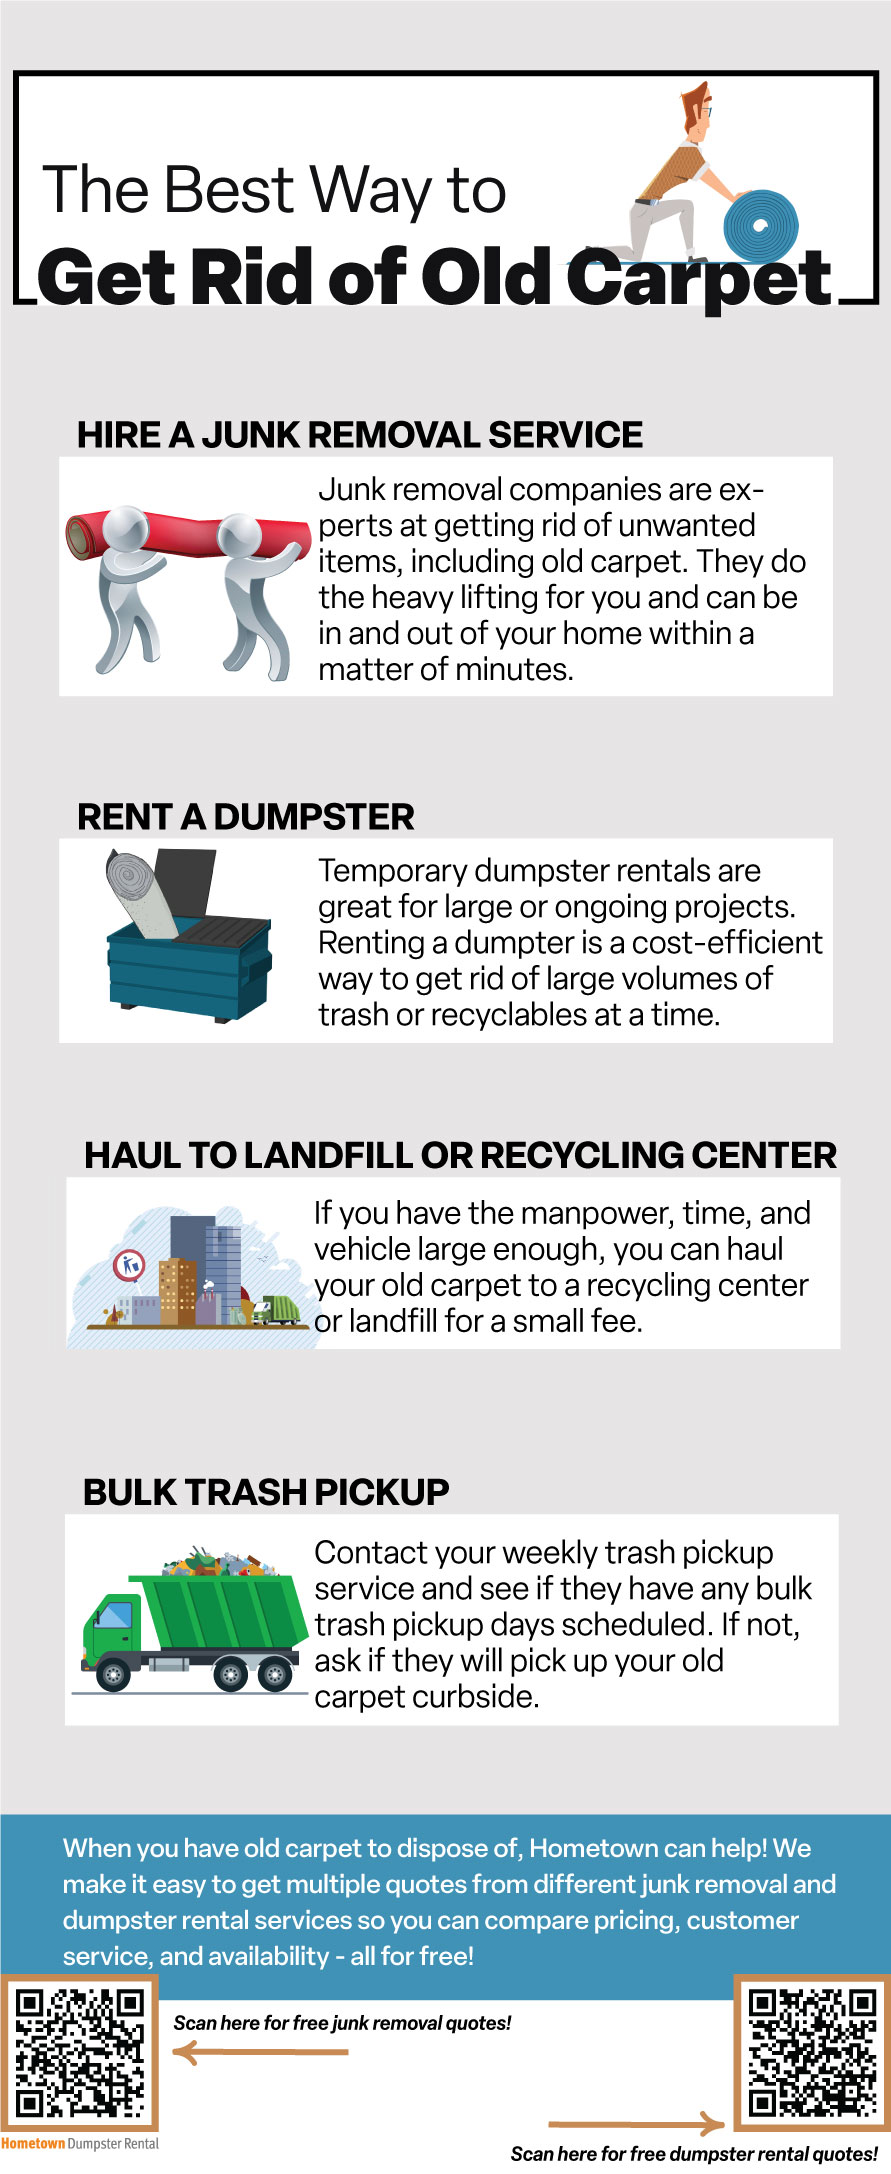 The best way to get rid of old carpet infographic